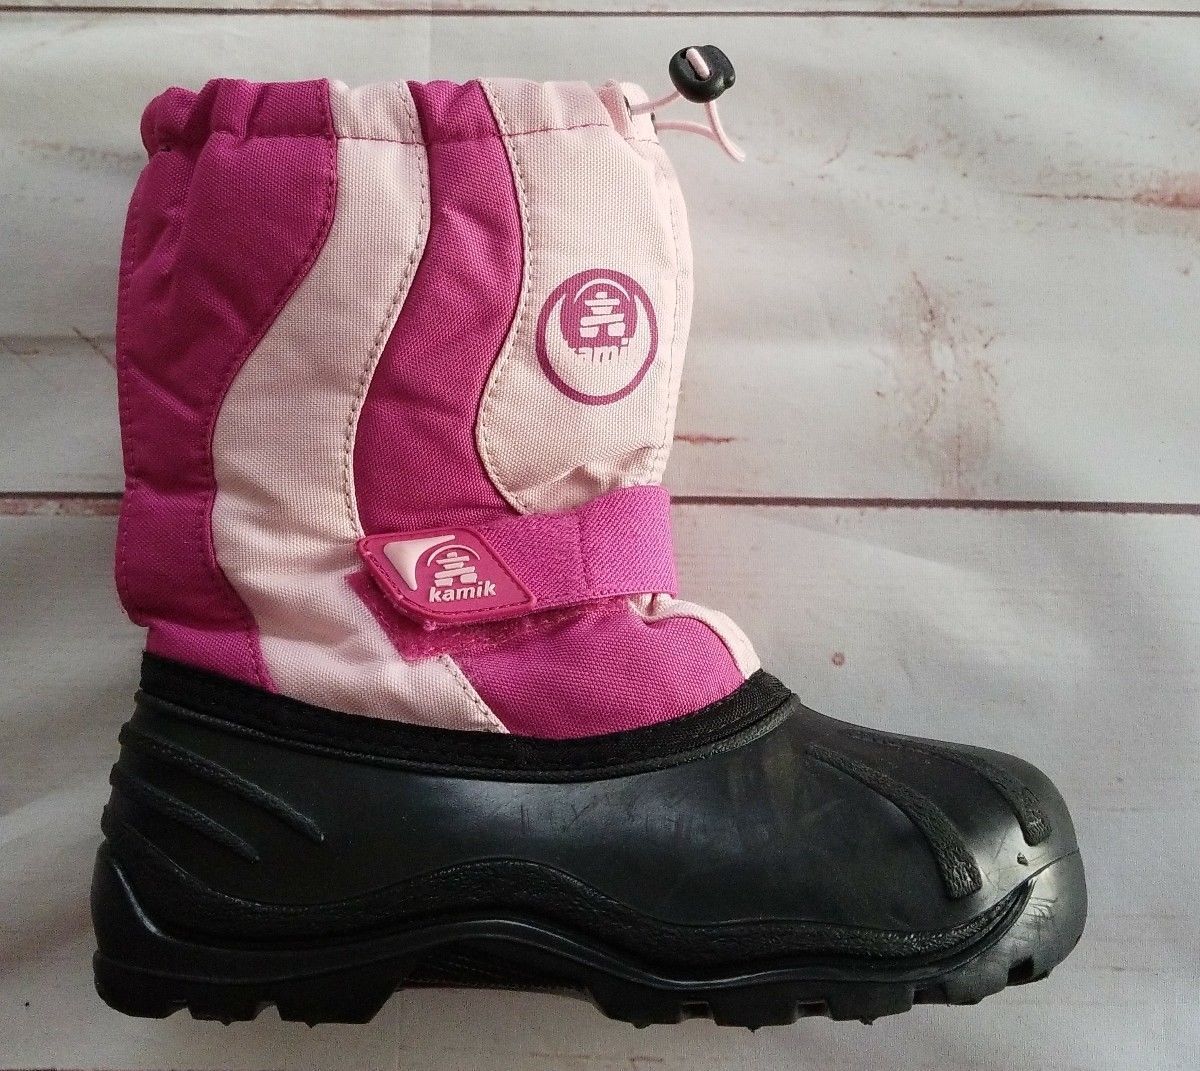 youth girls snow boots